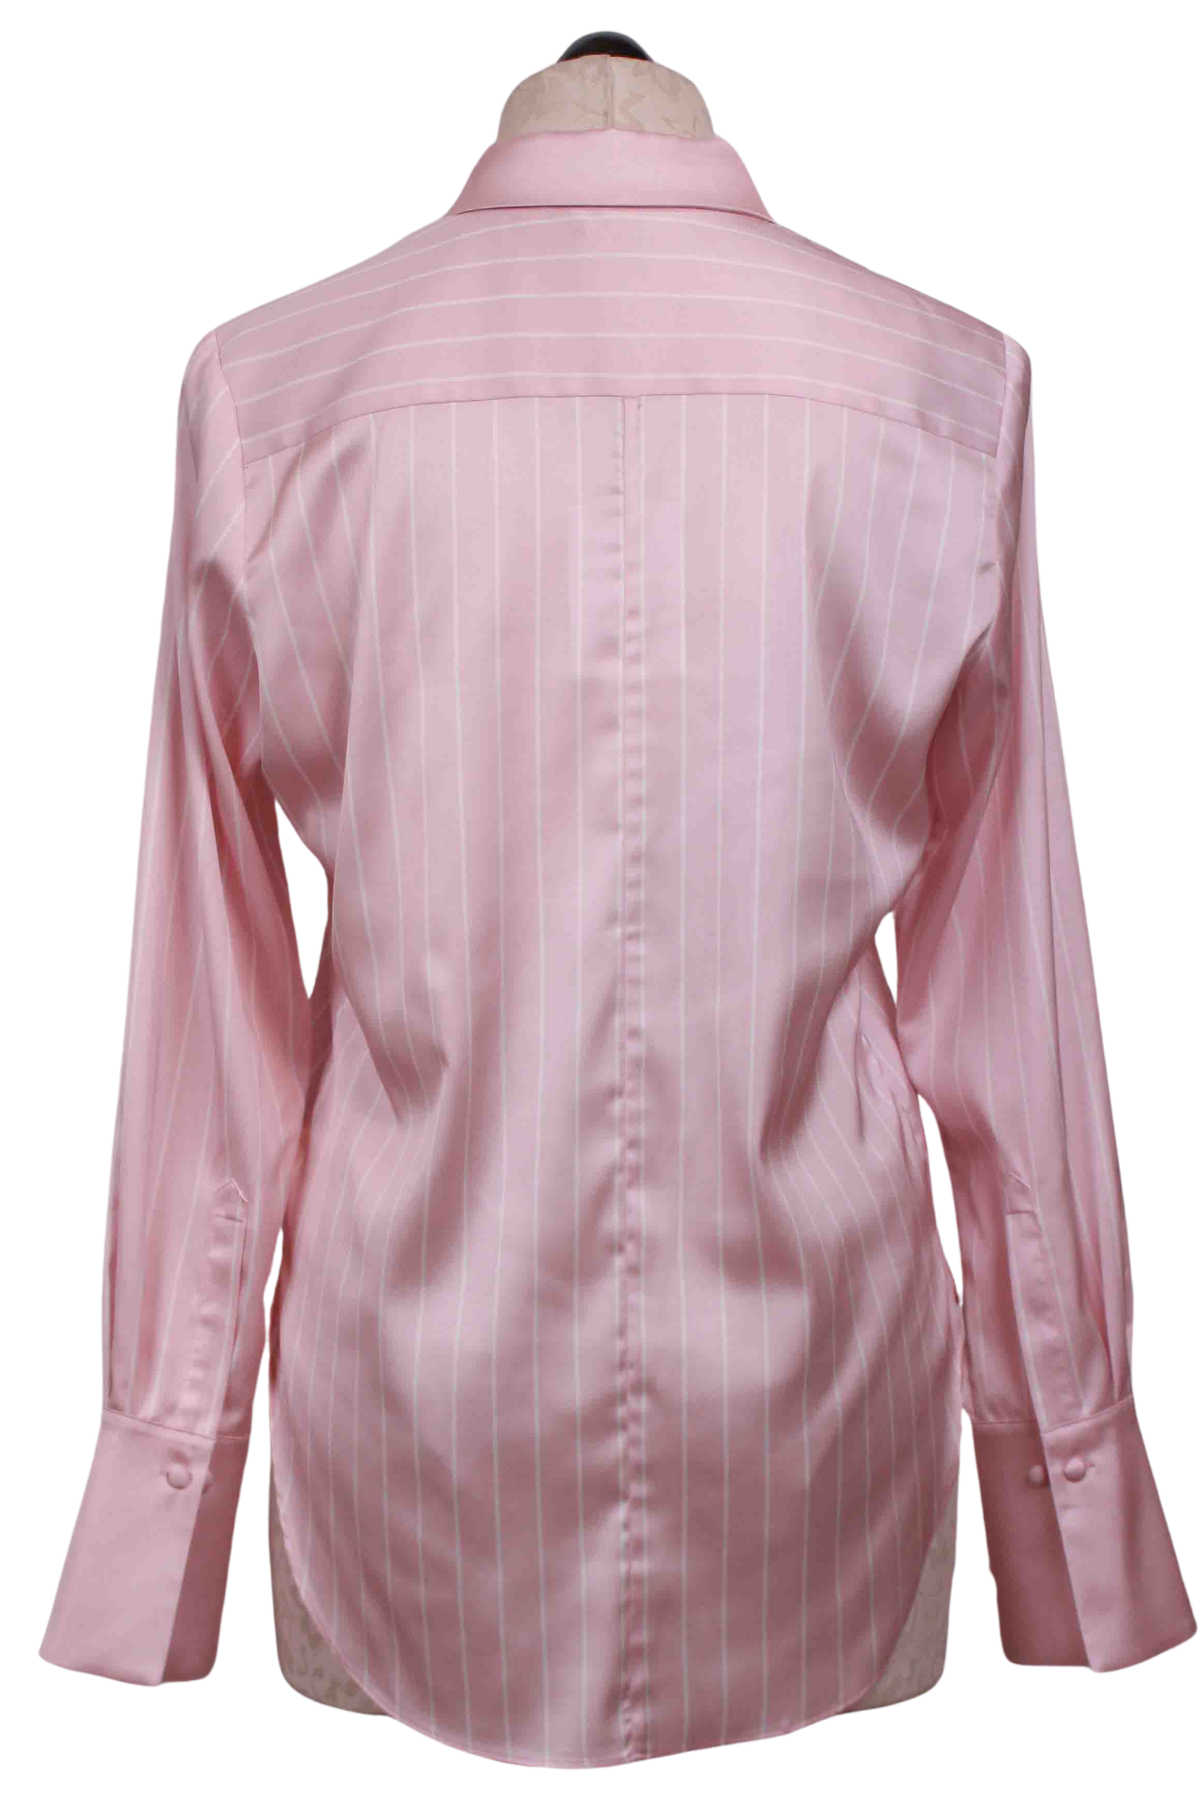 back view of  Ballet Slipper/White Jay Pinstripe Blouse by Generation Love